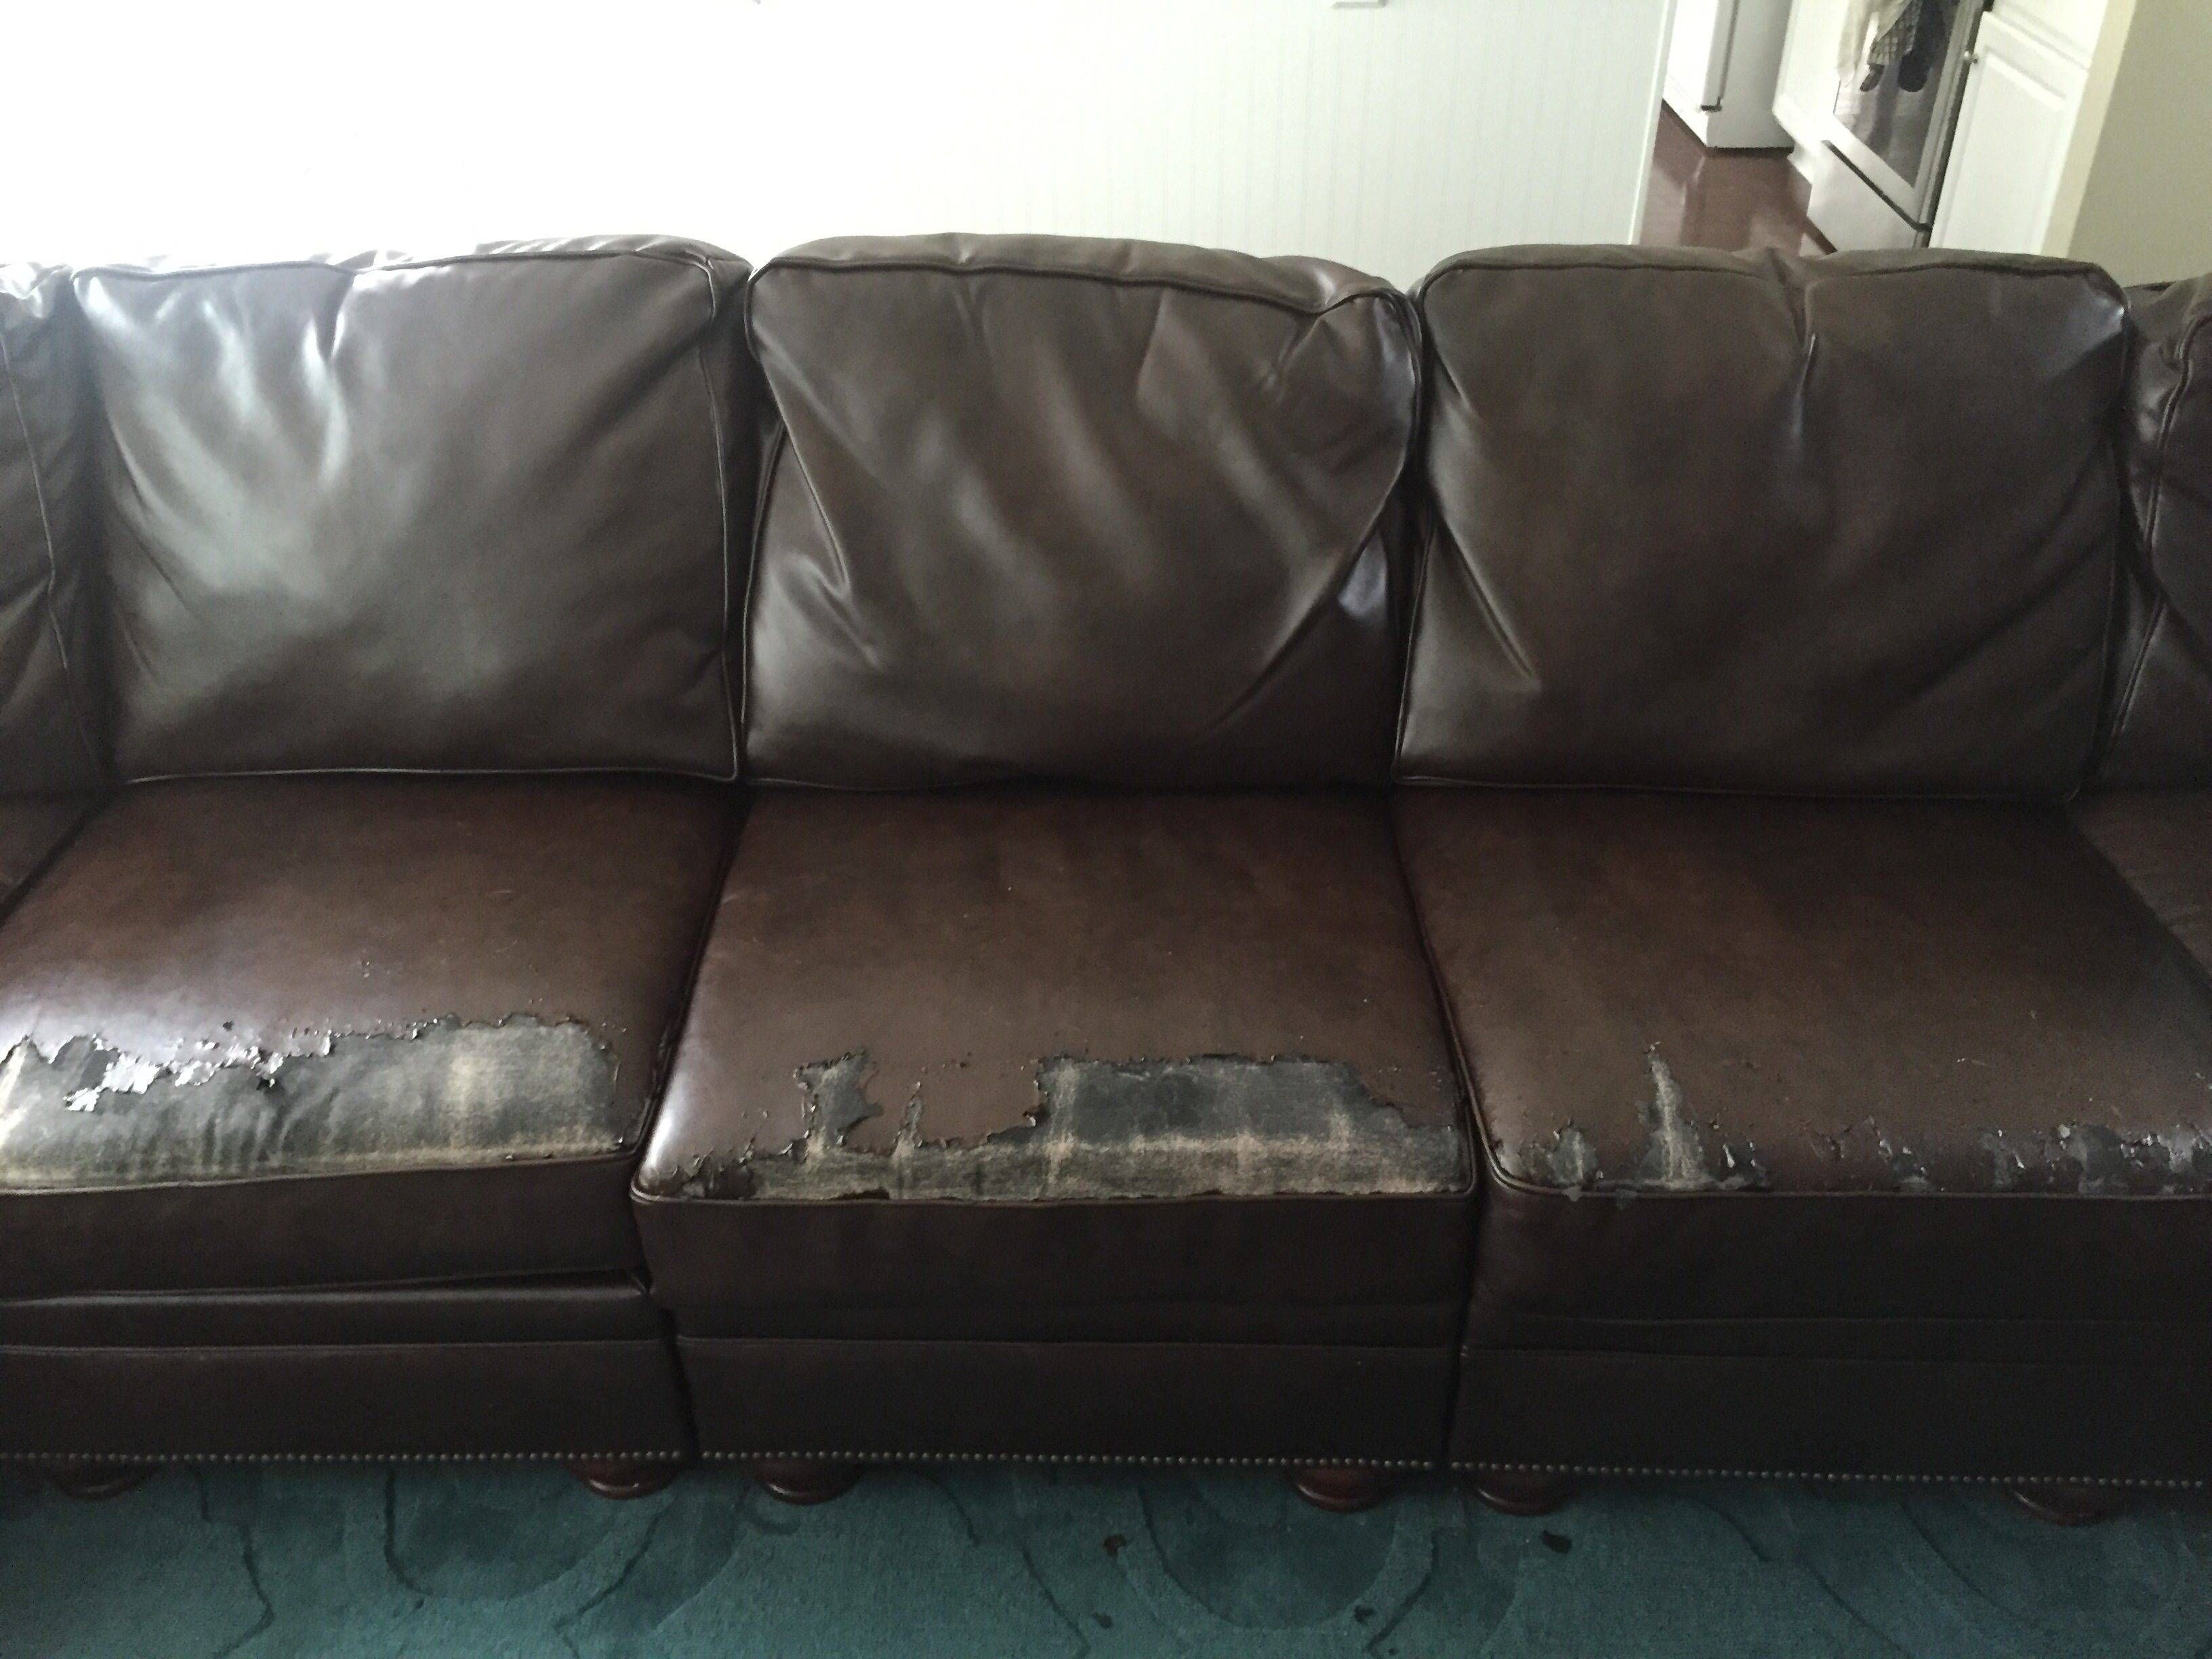 Top 129 Complaints And Reviews About Broyhill Inside Broyhill Sectional Sofas (View 13 of 30)